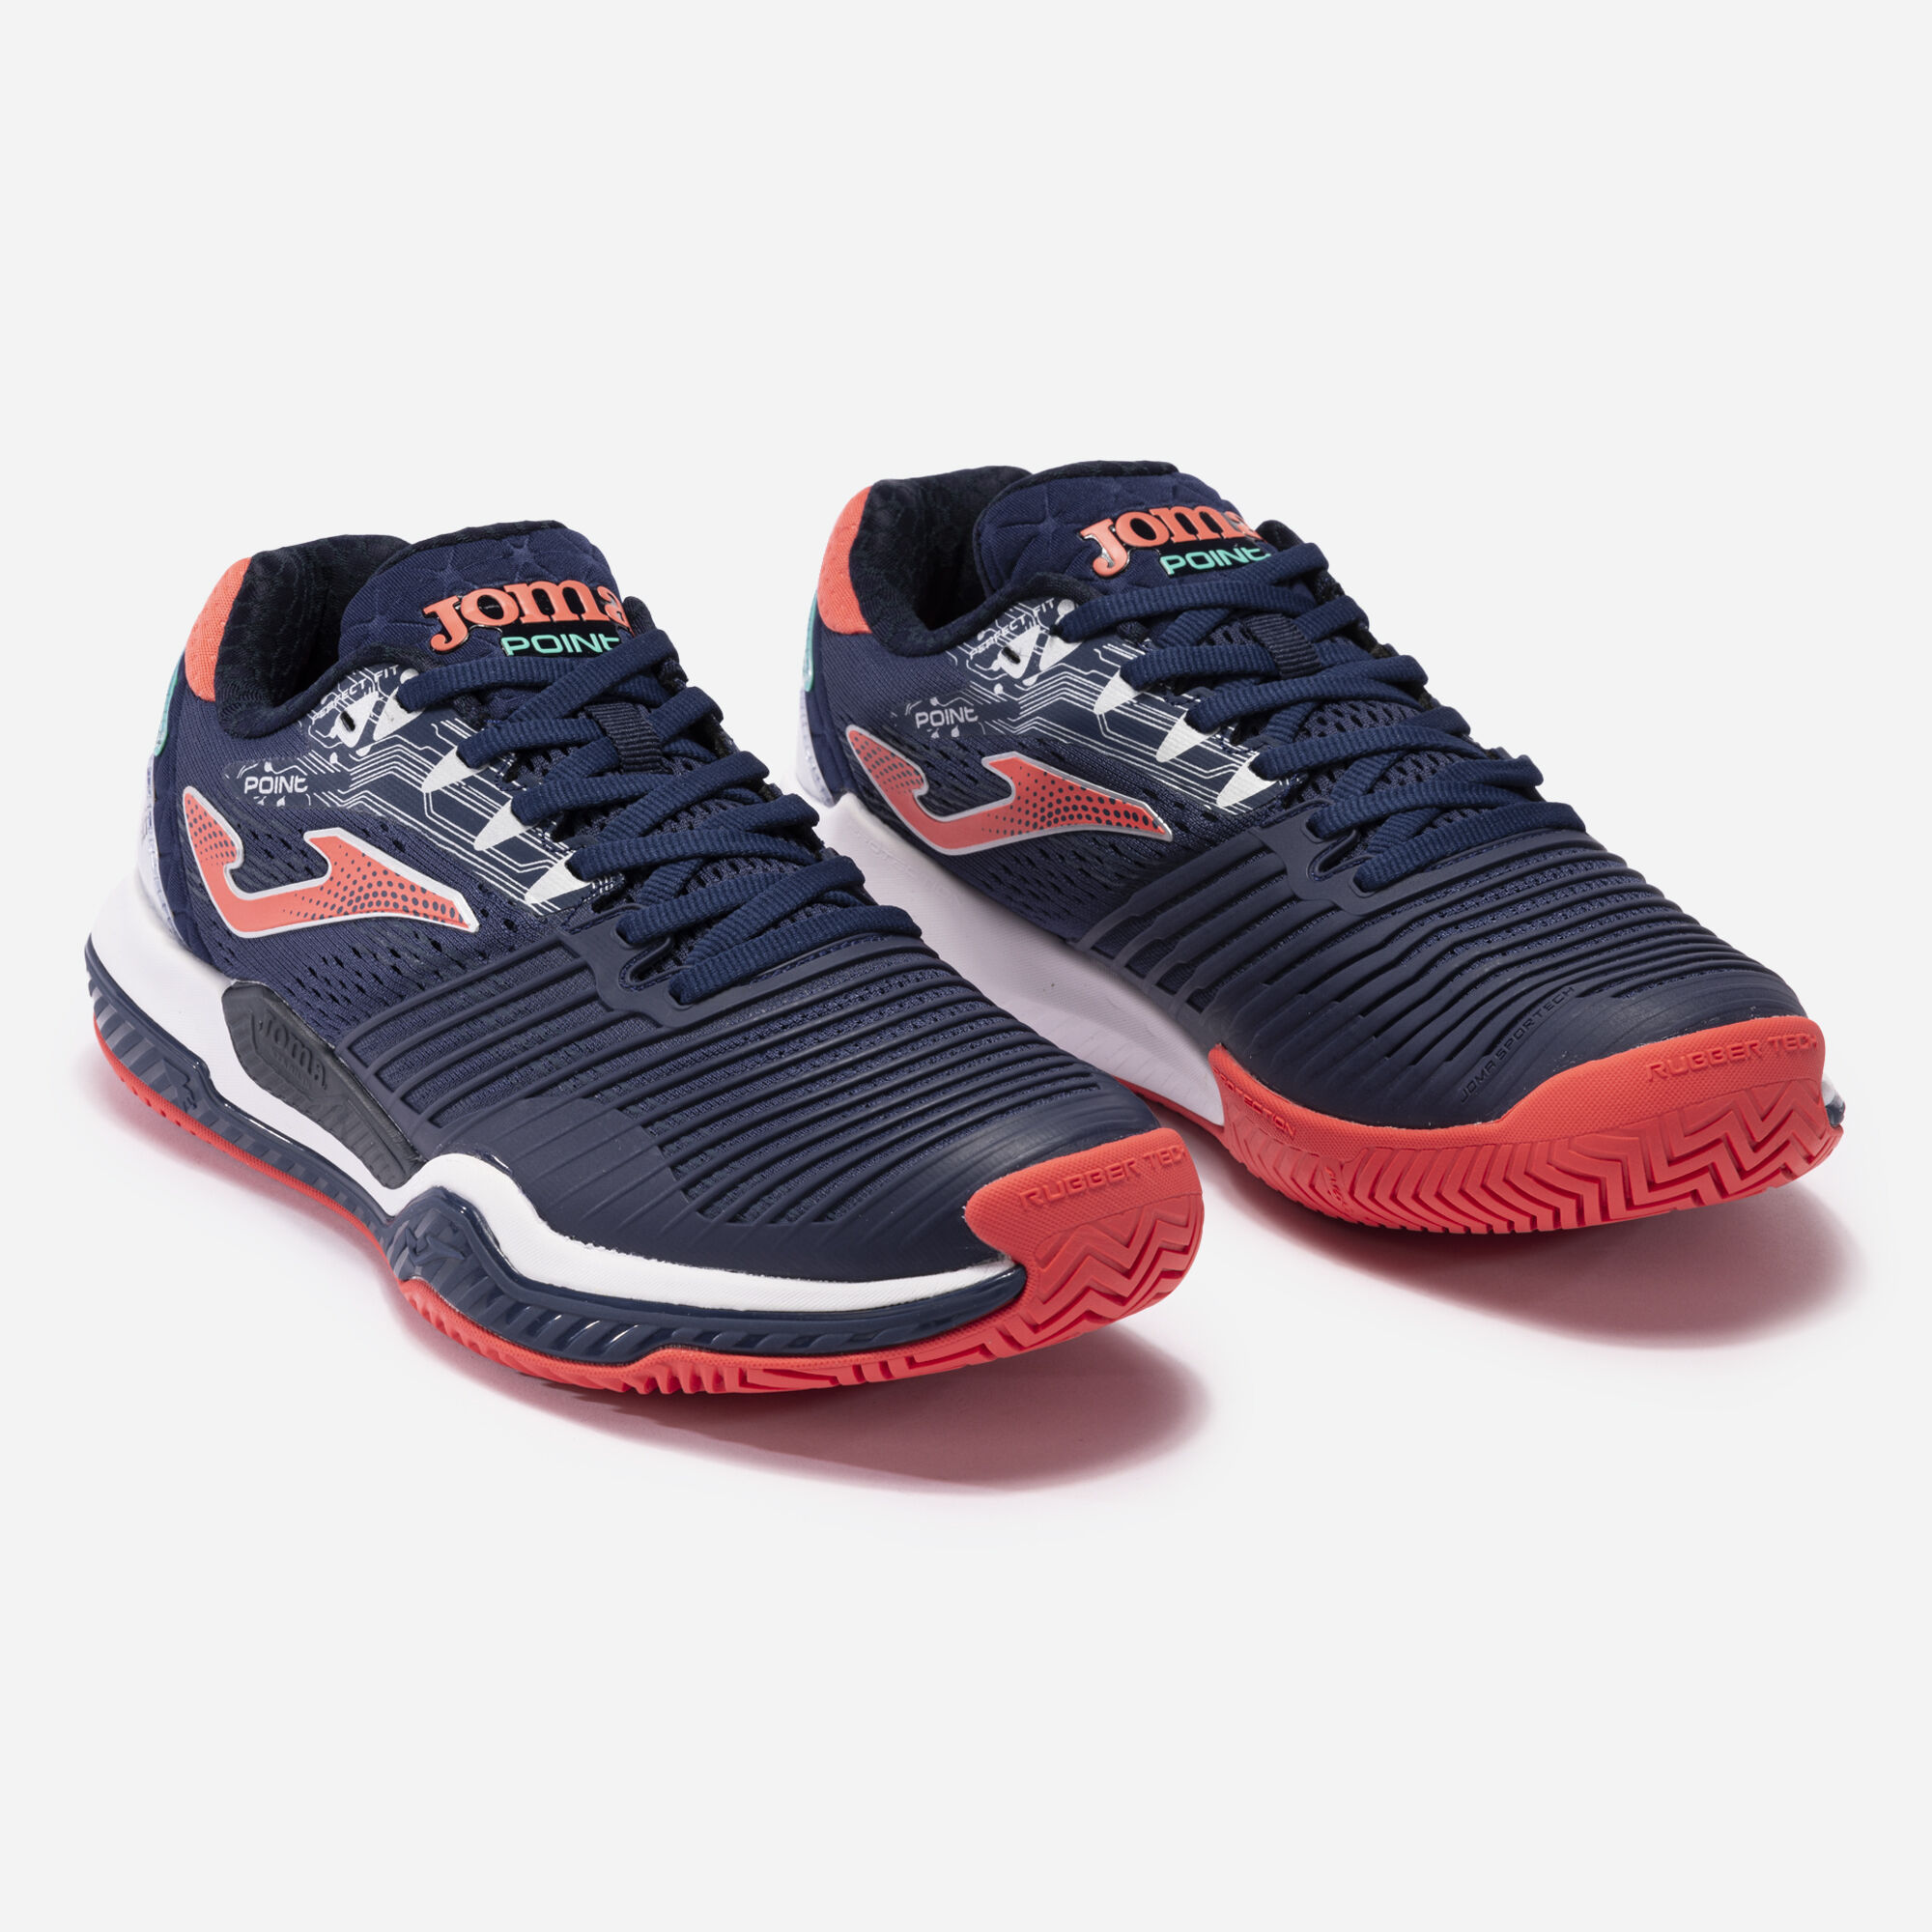 Shoes T.Point 23 hard court man navy blue red